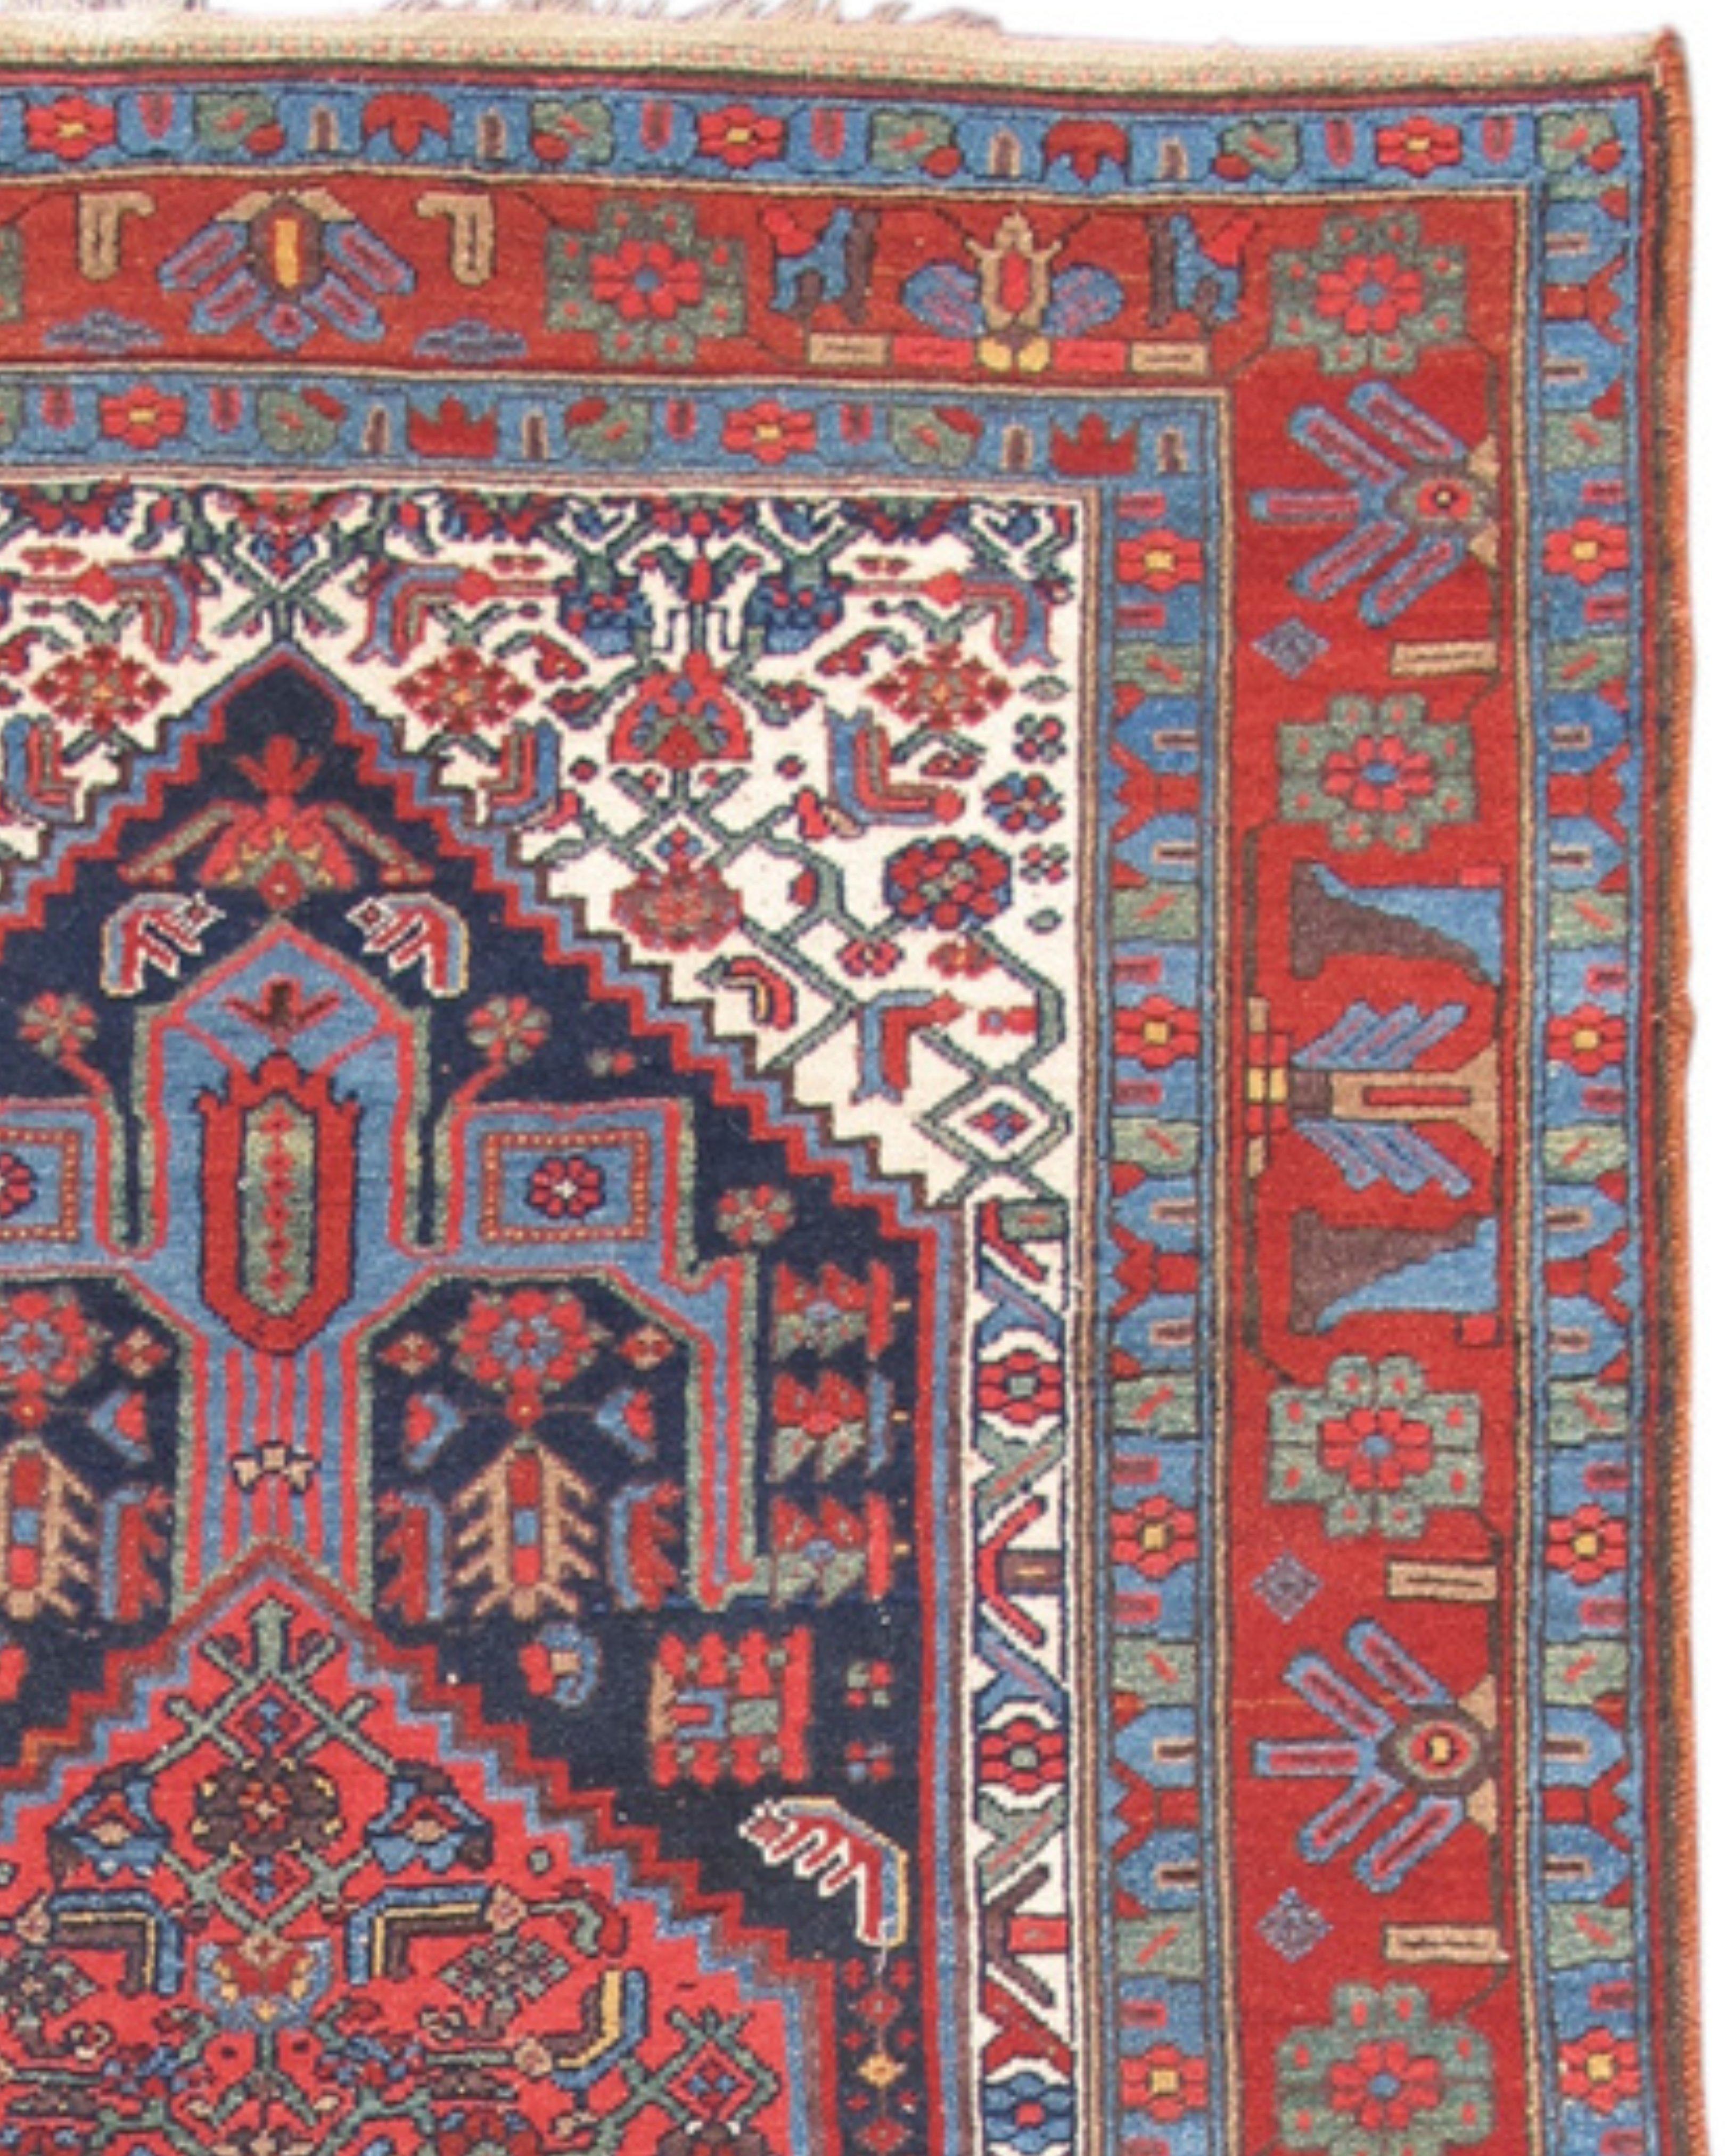 Antique Persian  Hamadan Rug, c. 1900

This happy little rug was woven in the area of the town of Hamadan in central western Persia. A traditional Persian medallion has been miniaturized and playfully reinterpreted. White corner pieces contrast